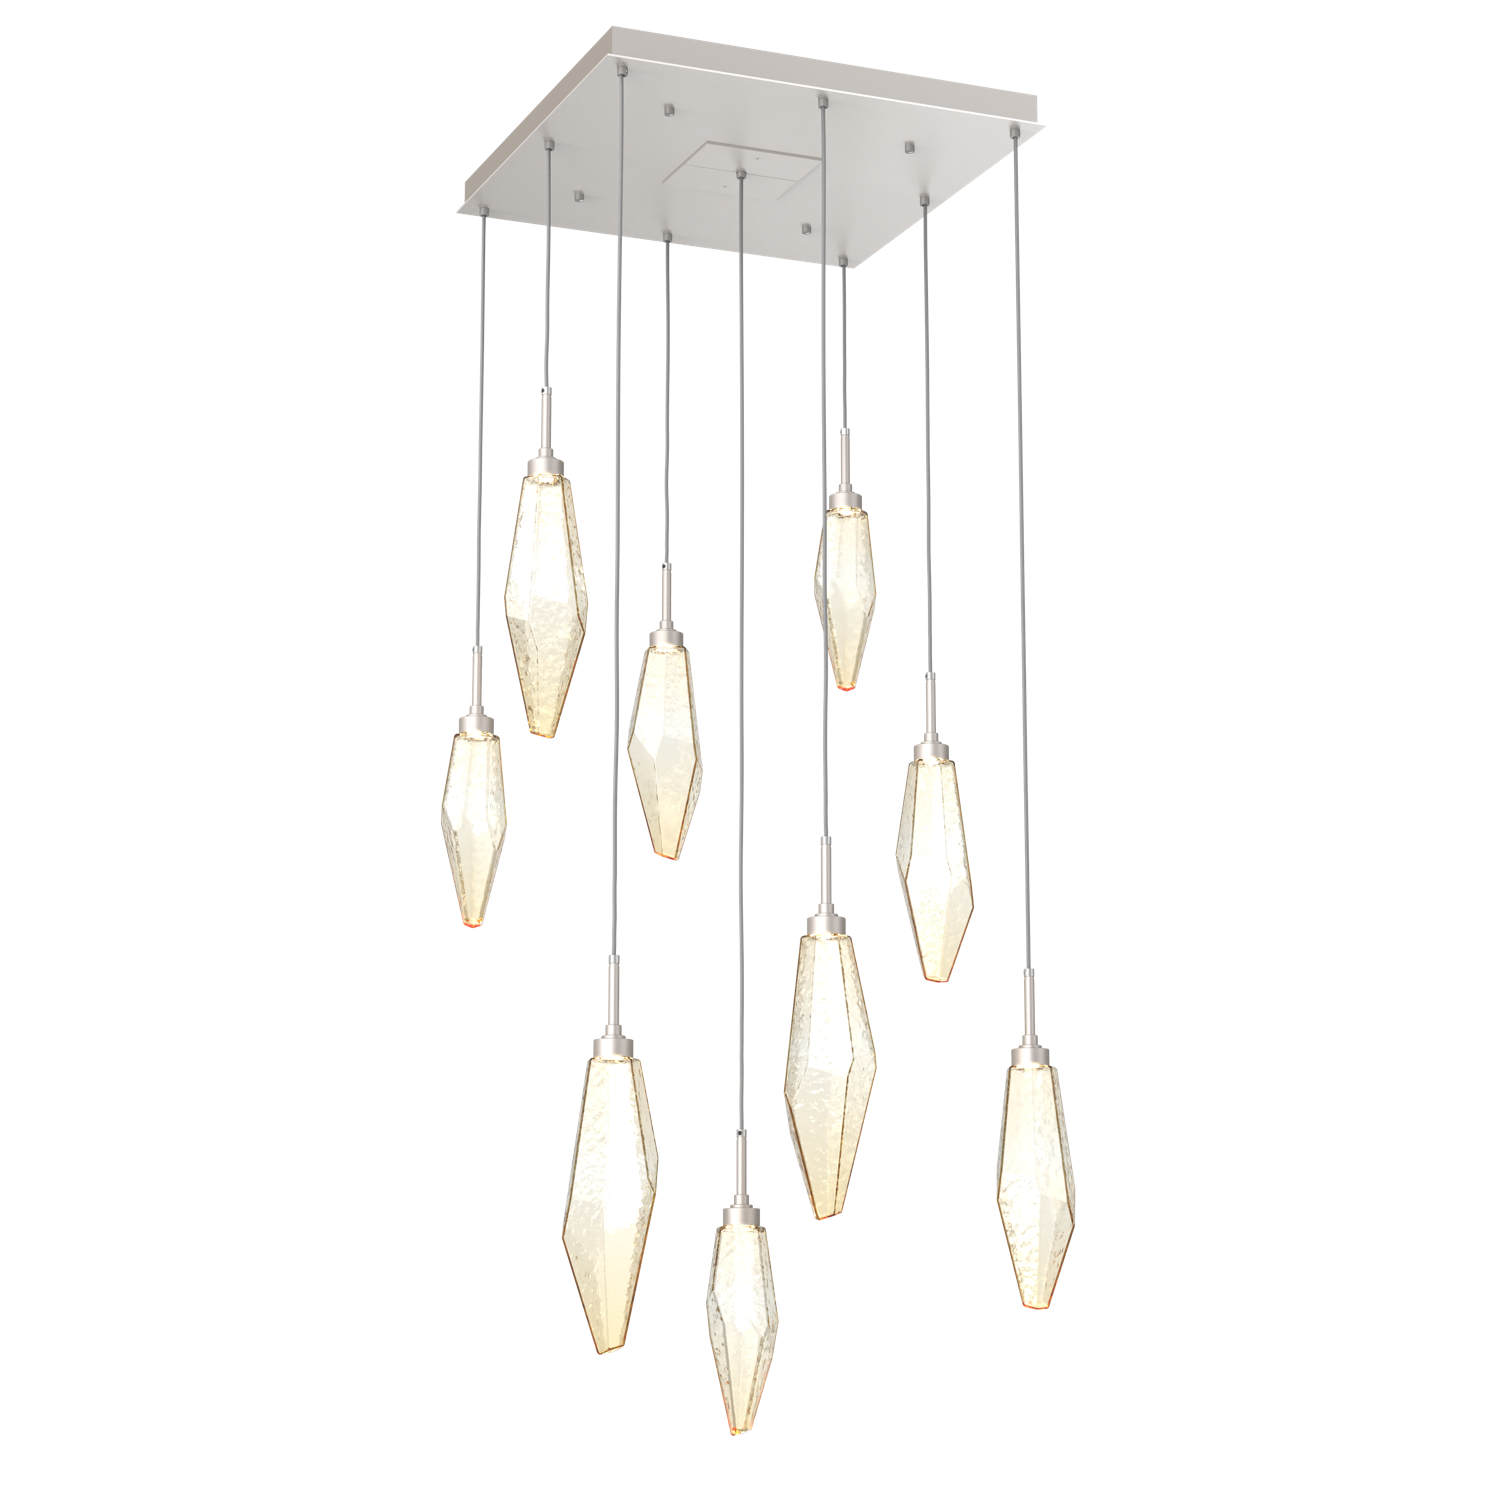 CHB0050-09-BS-CA-Hammerton-Studio-Rock-Crystal-9-light-square-pendant-chandelier-with-beige-silver-finish-and-chilled-amber-blown-glass-shades-and-LED-lamping